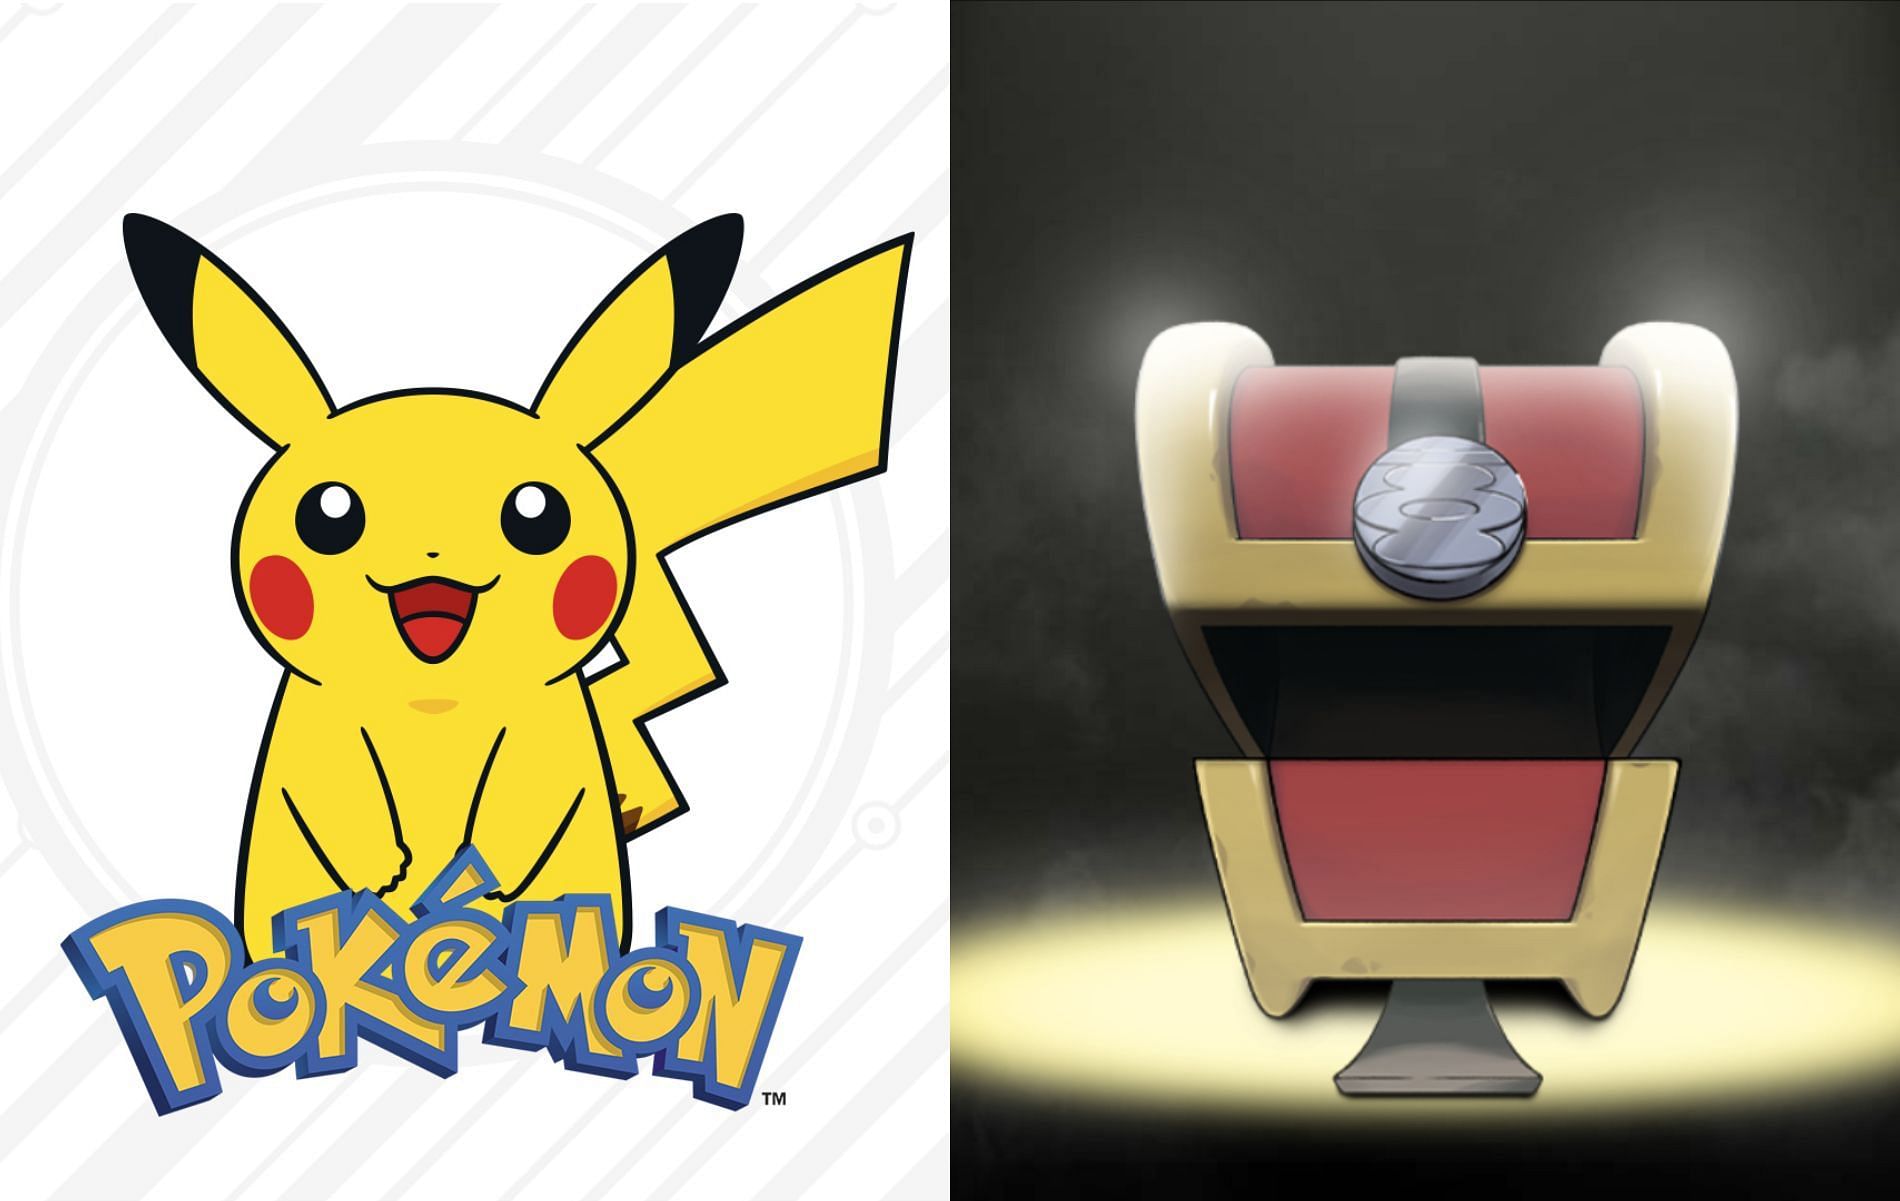 A brand new surprise seems to be coming soon for fans of the monster-taming franchise (Images via The Pokemon Company)